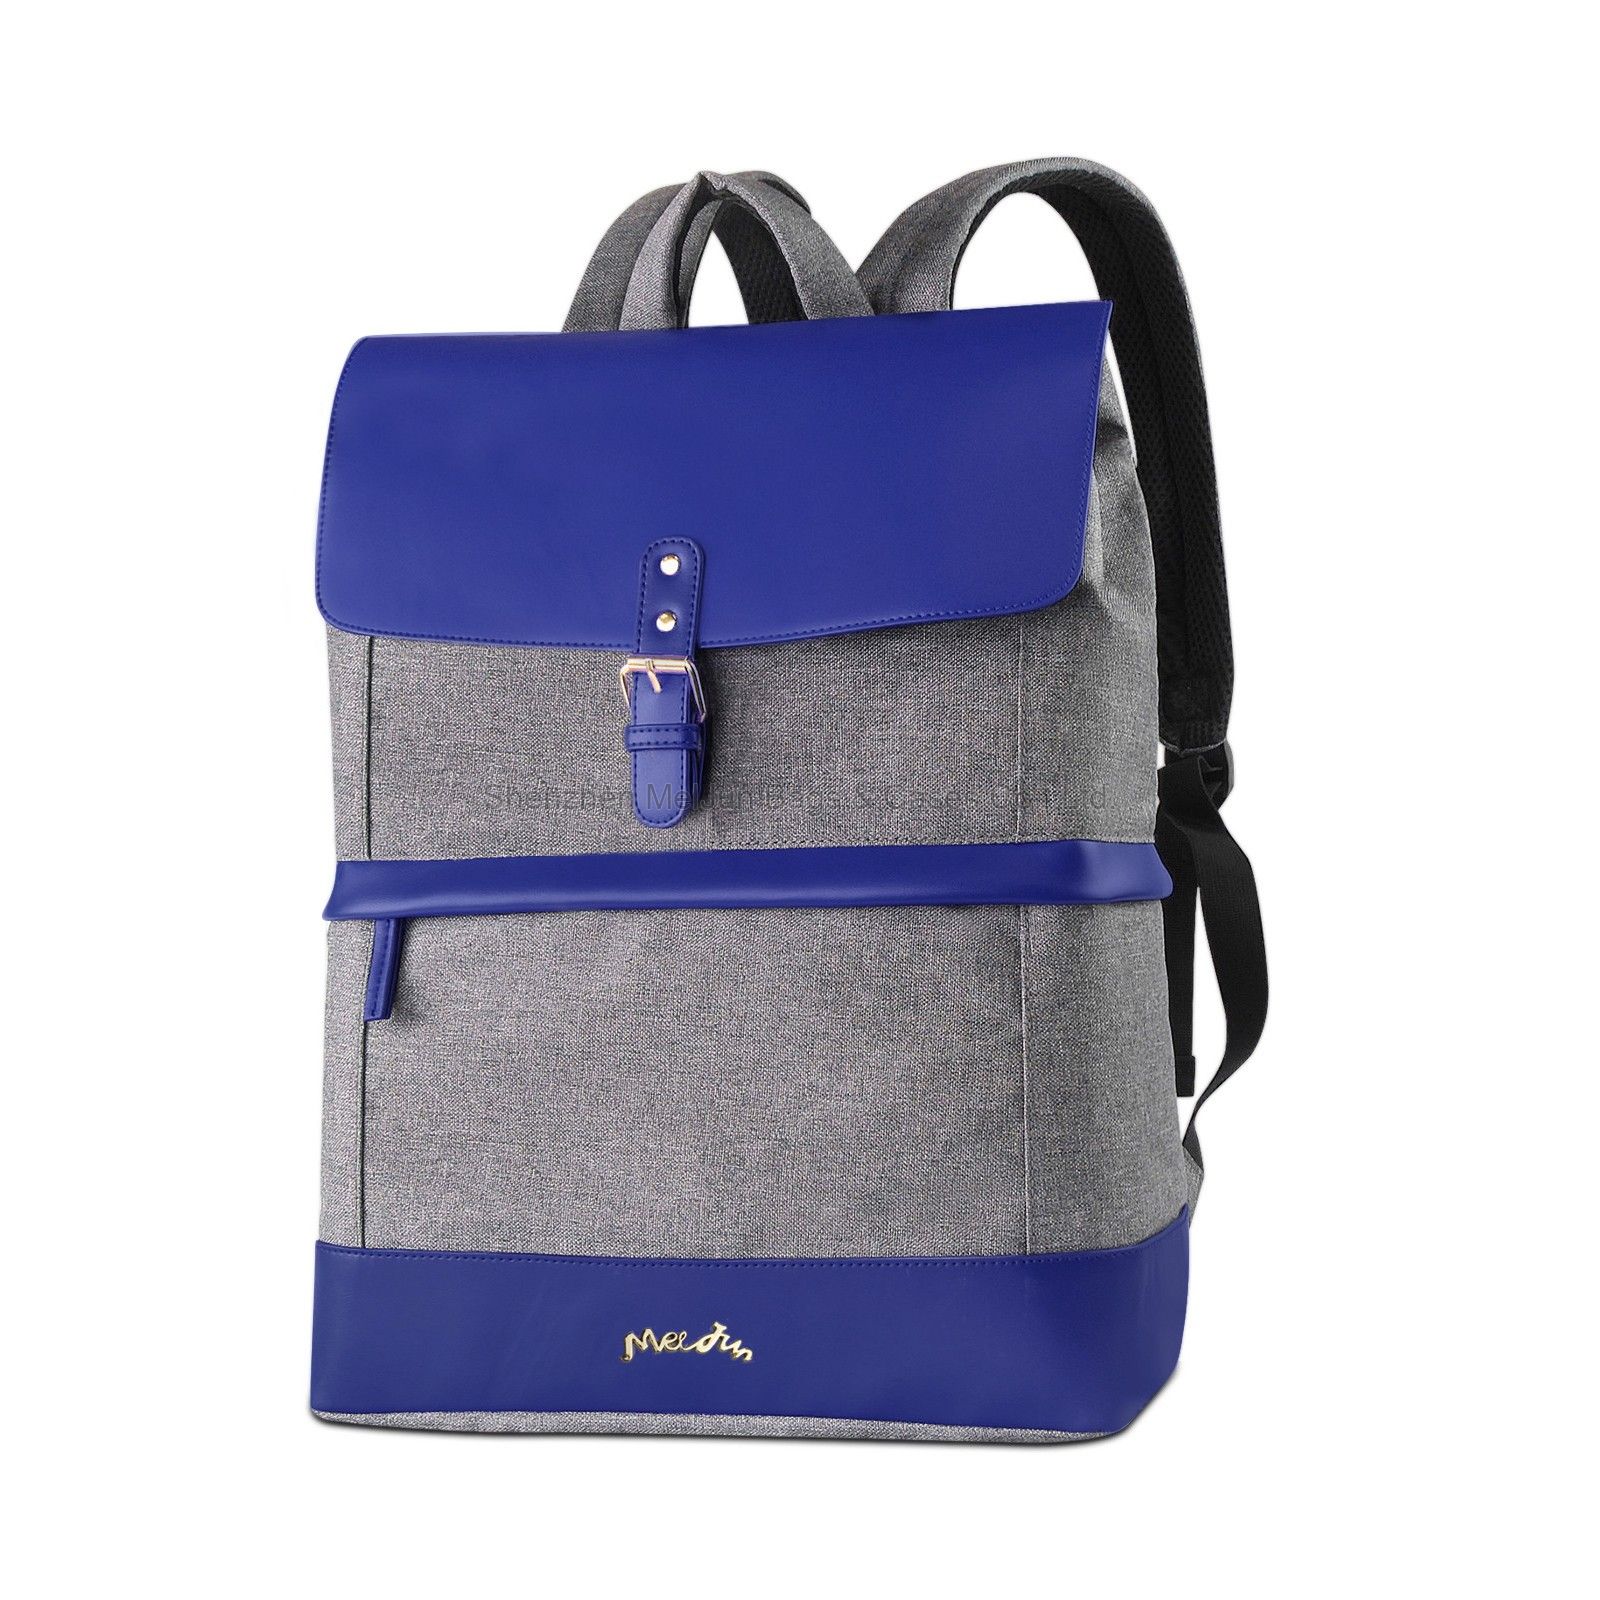 New fashion school style dark blue/pink PU polyester large backpack